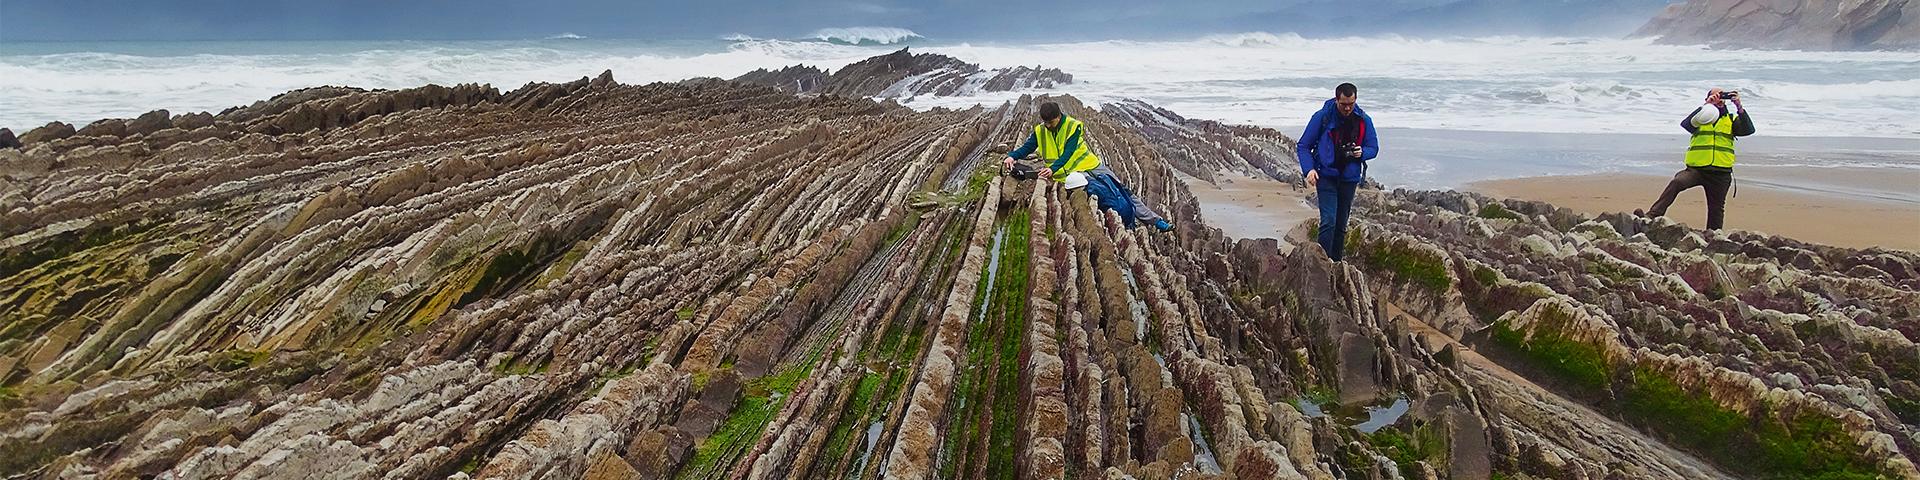 BRGM agents are studying the Flyschs of Zumaia, Spanish Basque region